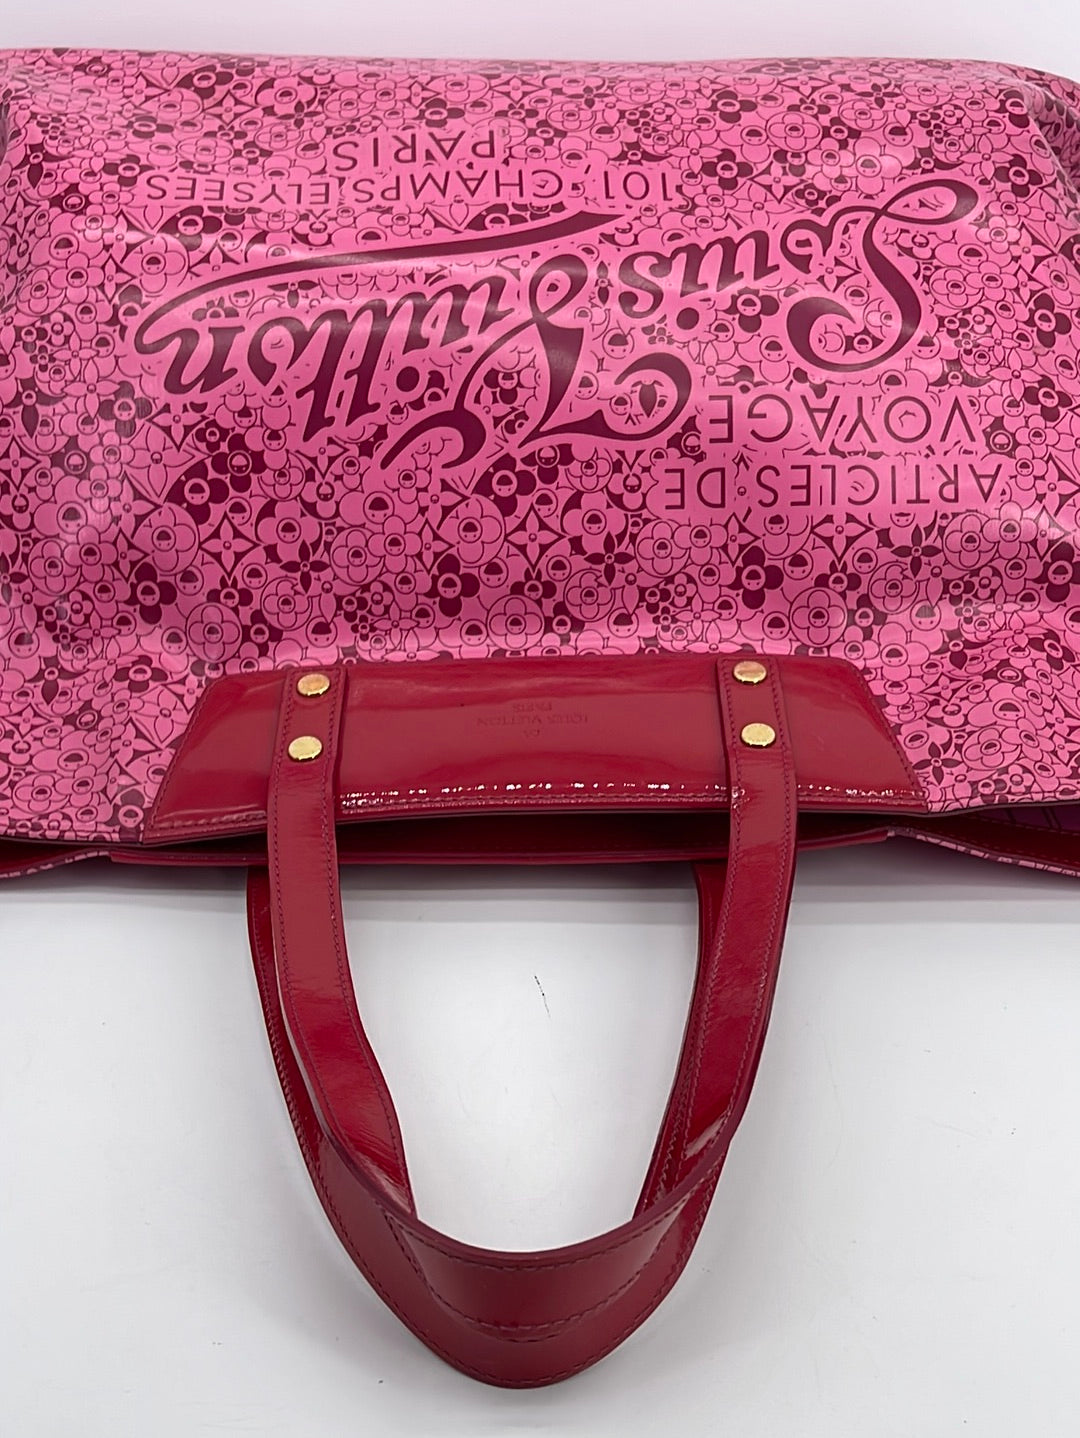 LOUIS VUITTON Cosmic Blossom PM Tote Bag Rose 702566